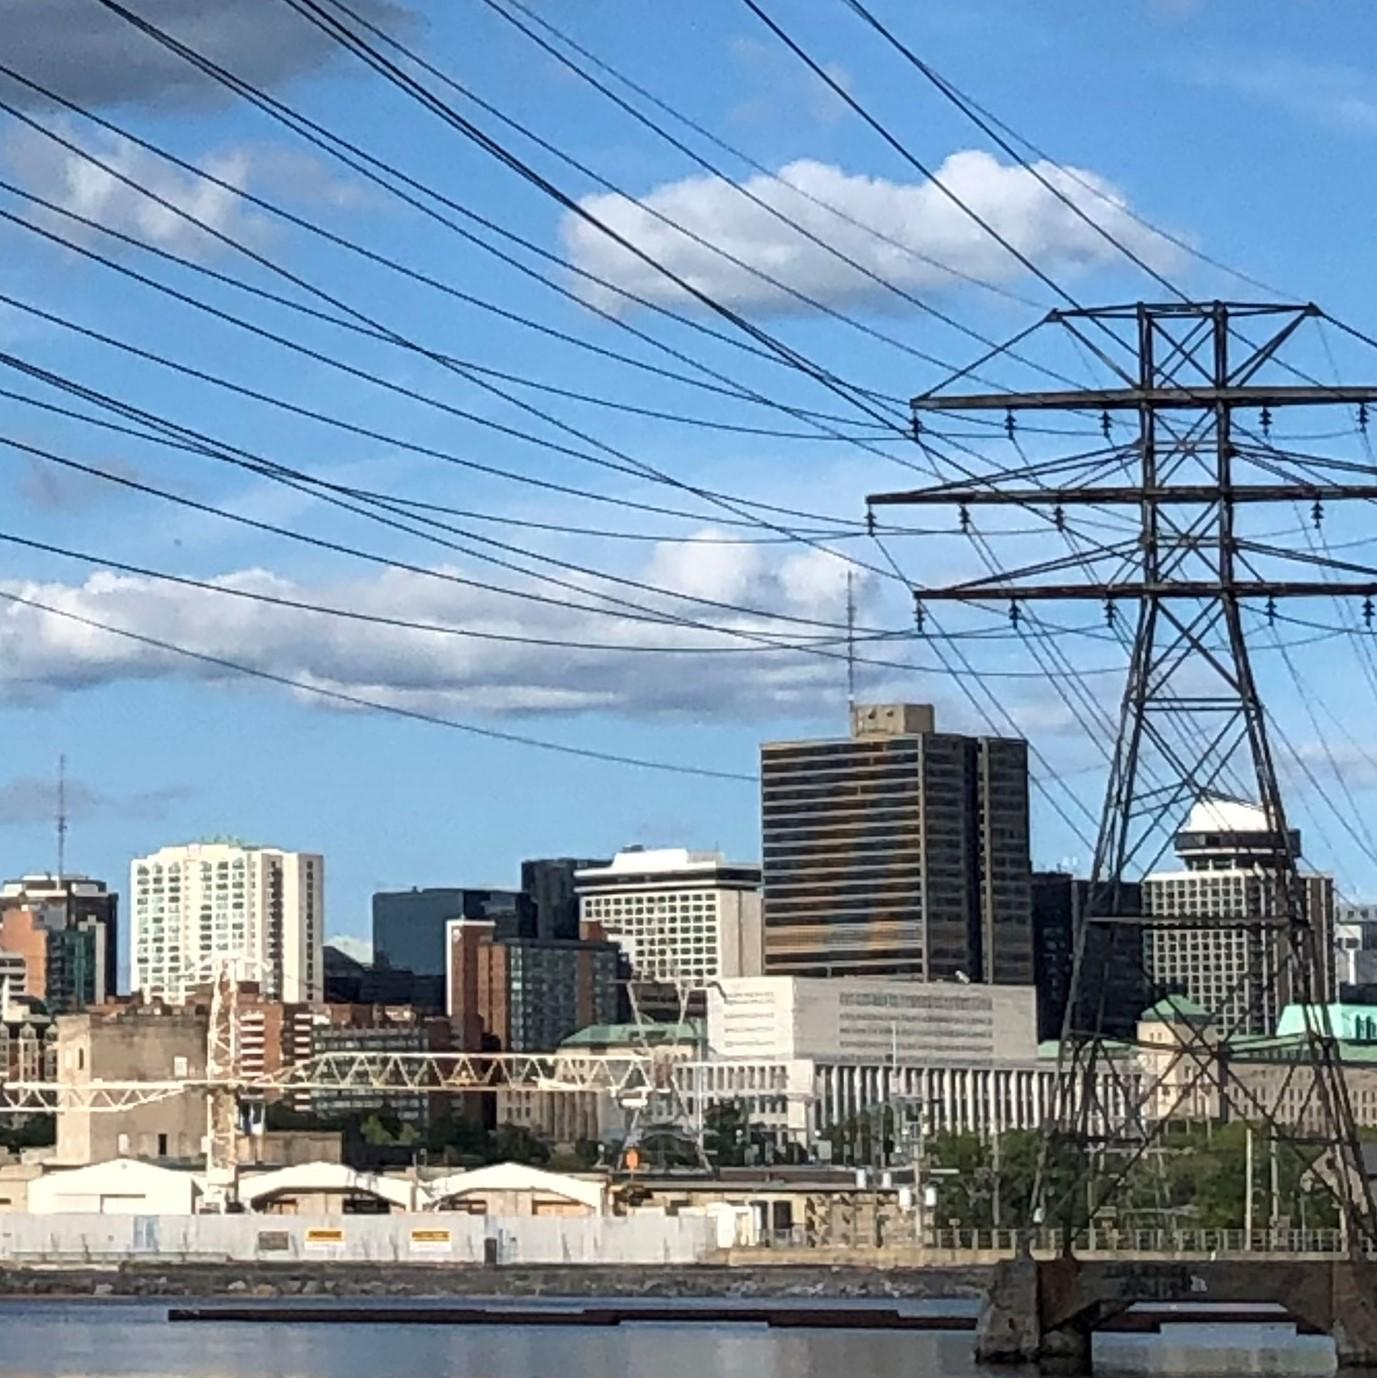 City view with powerlines